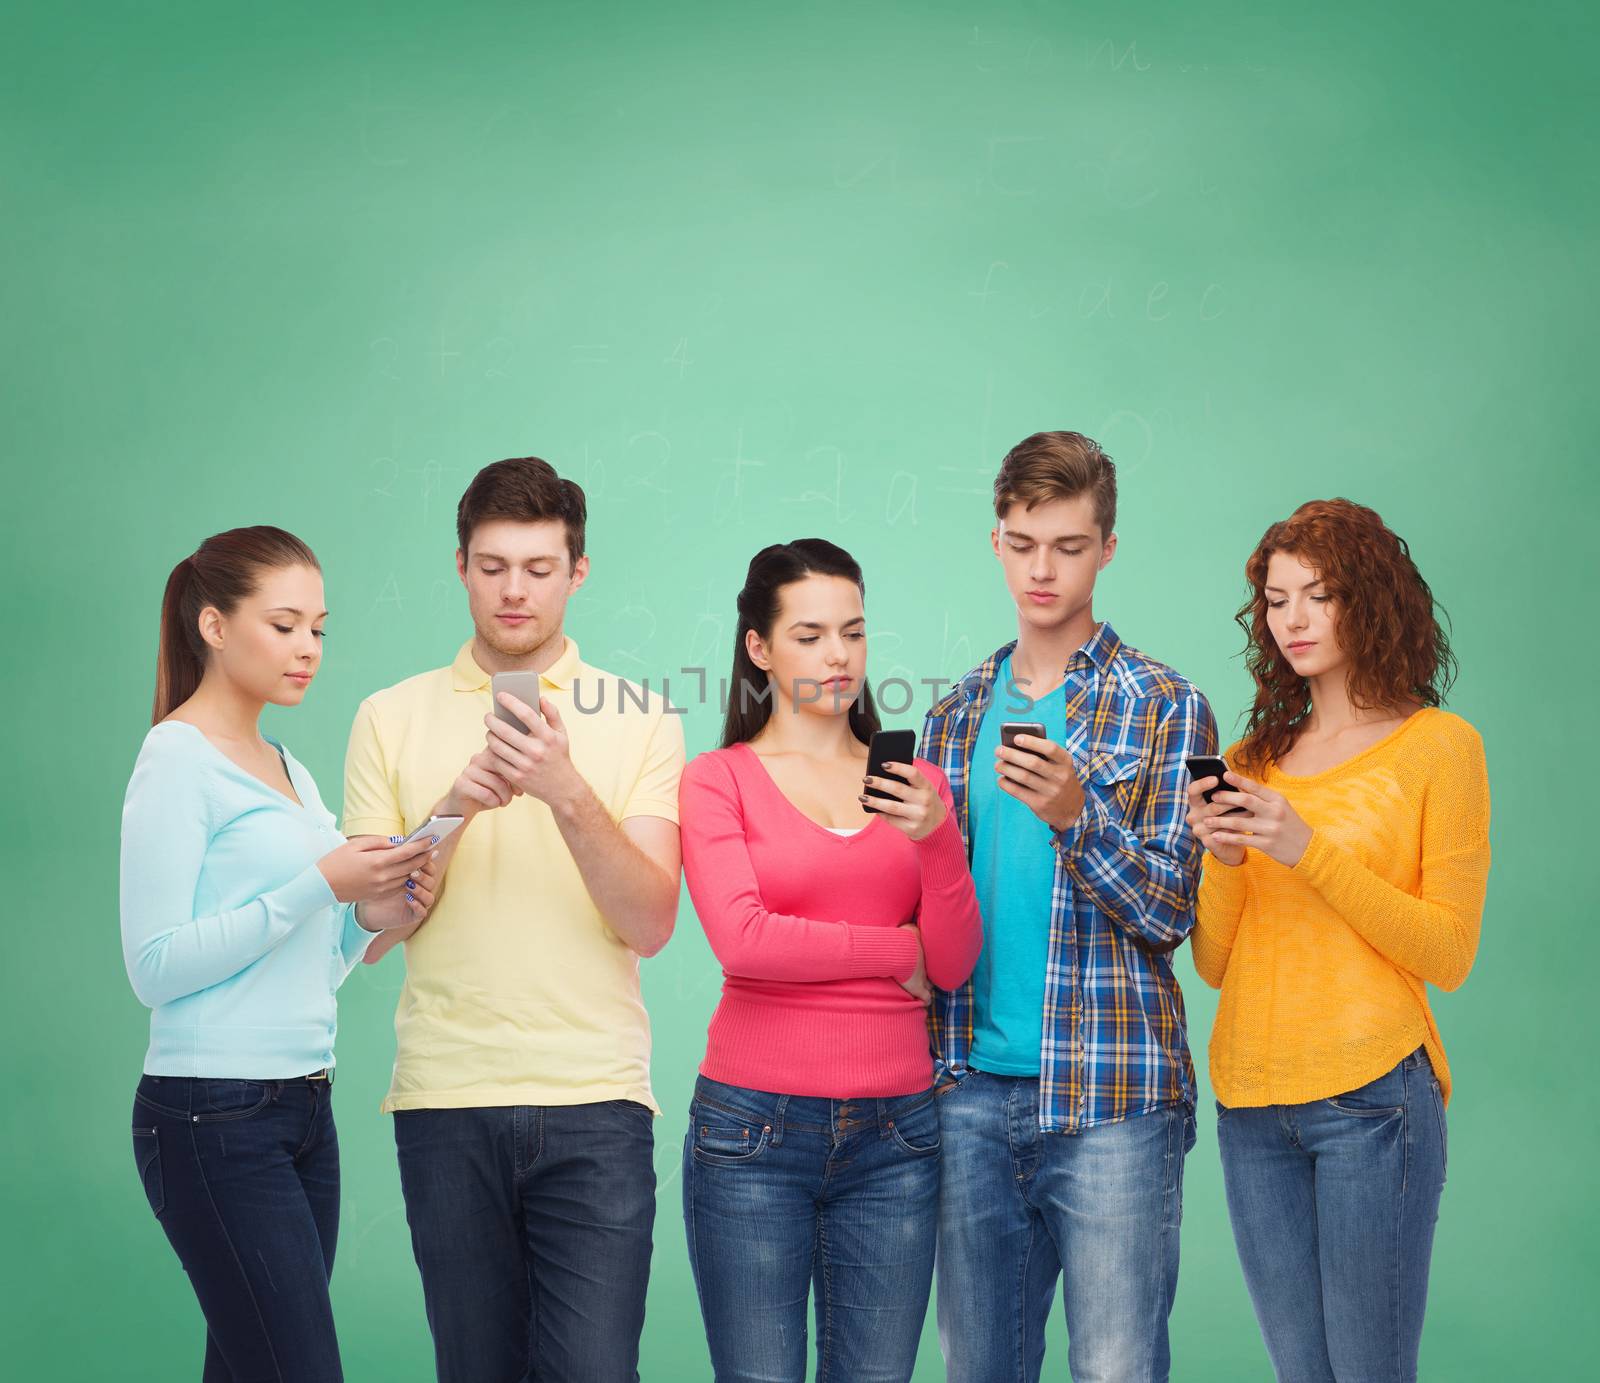 friendship, technology, education, school and people concept - group of serious teenagers with smartphones over green board background